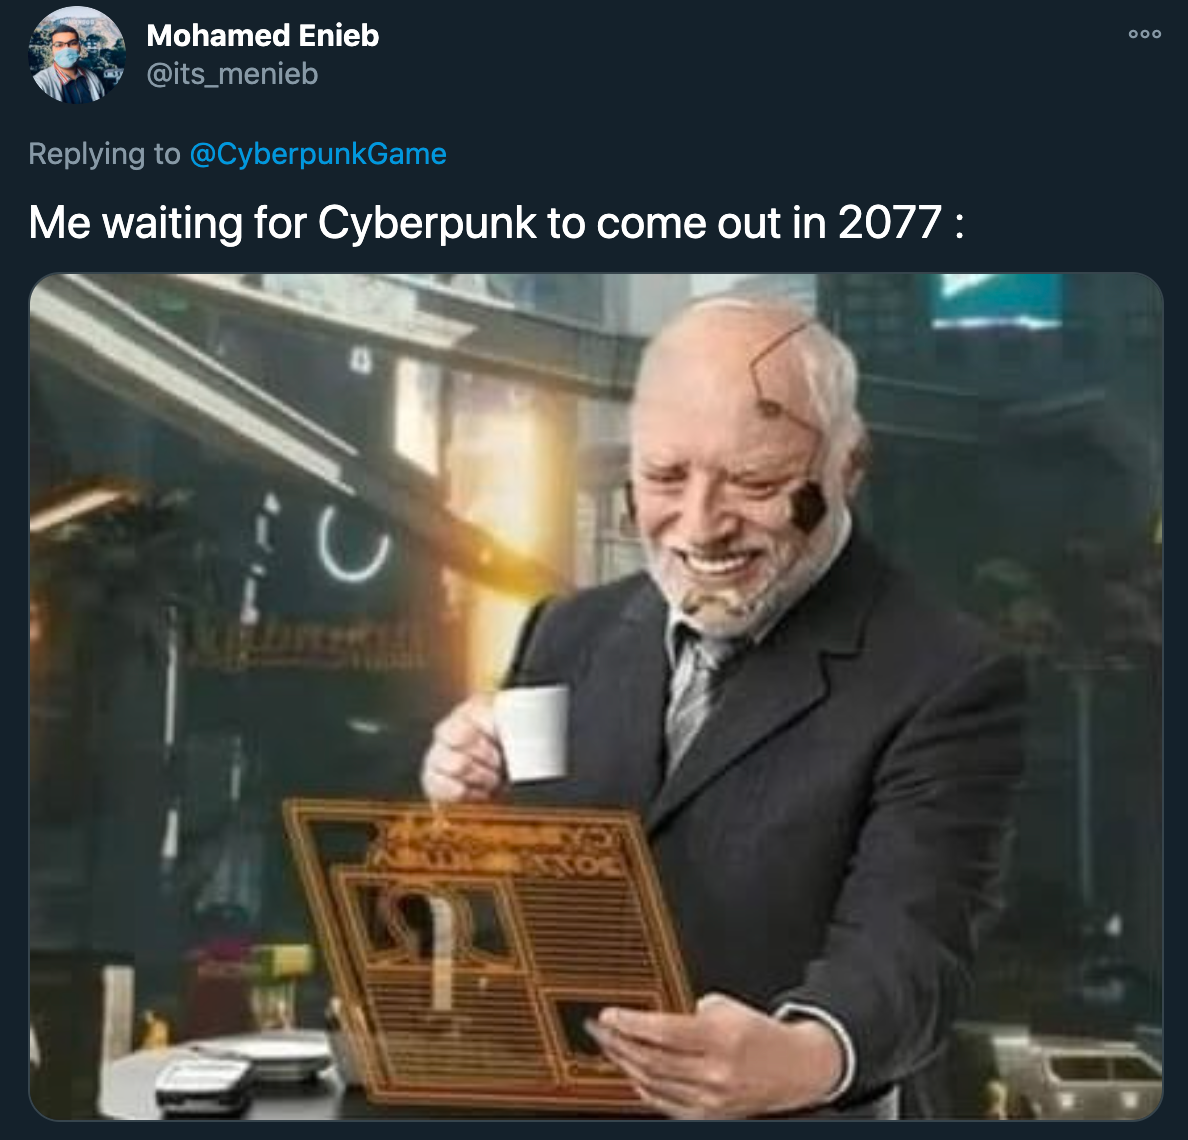 cyberpunk 2077 delay - Me waiting for Cyberpunk to come out in 2077